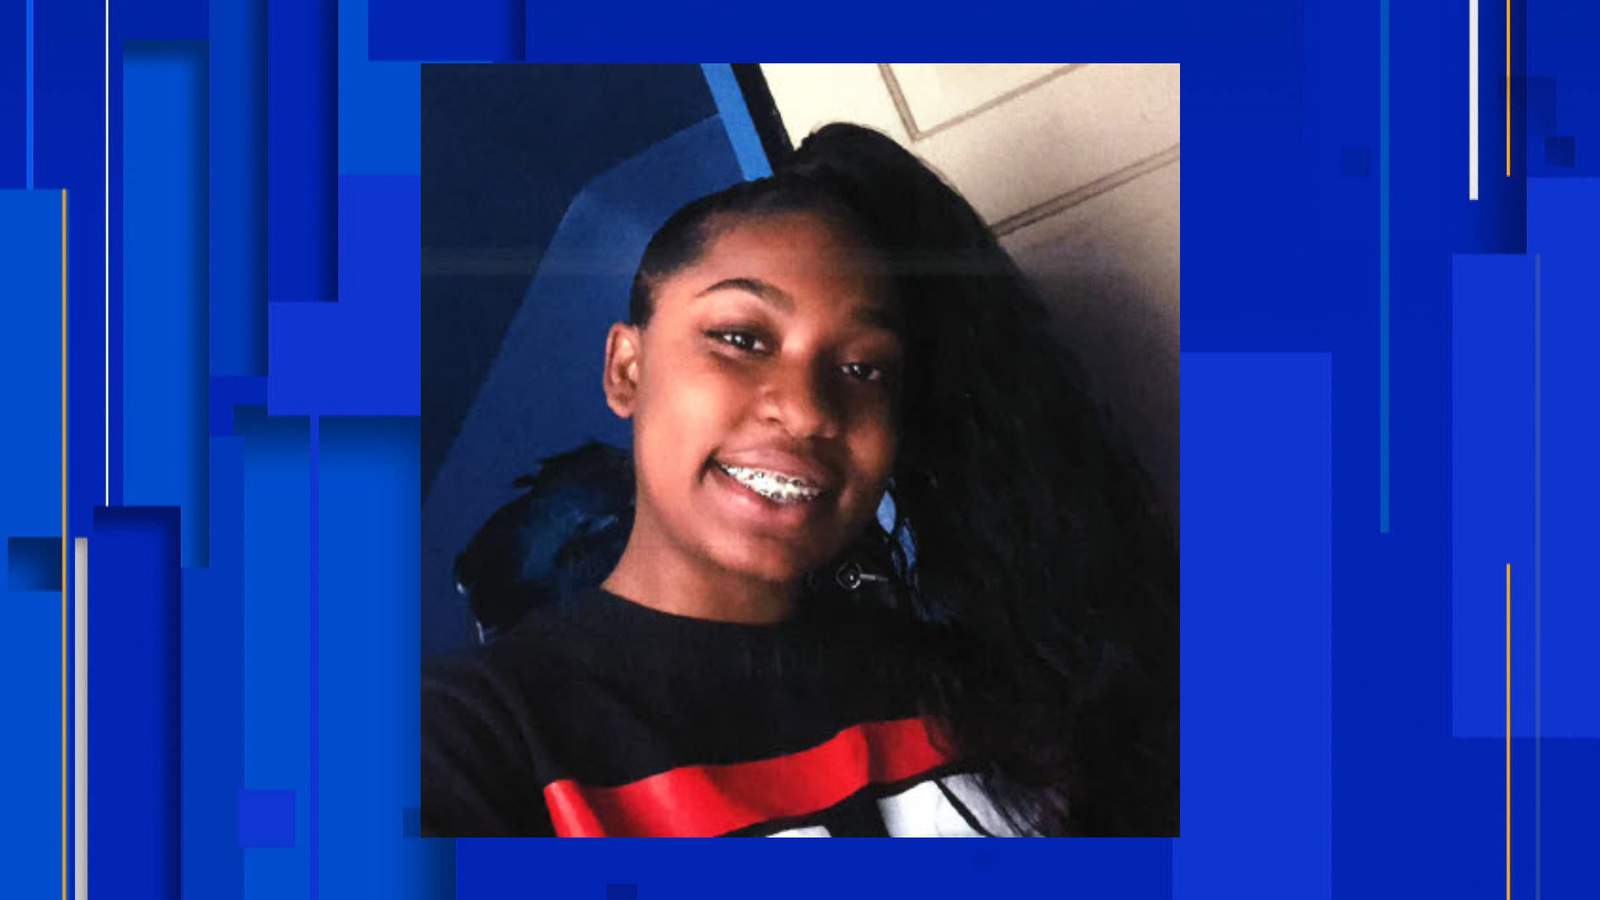 Detroit police search for 15-year-old missing since Friday